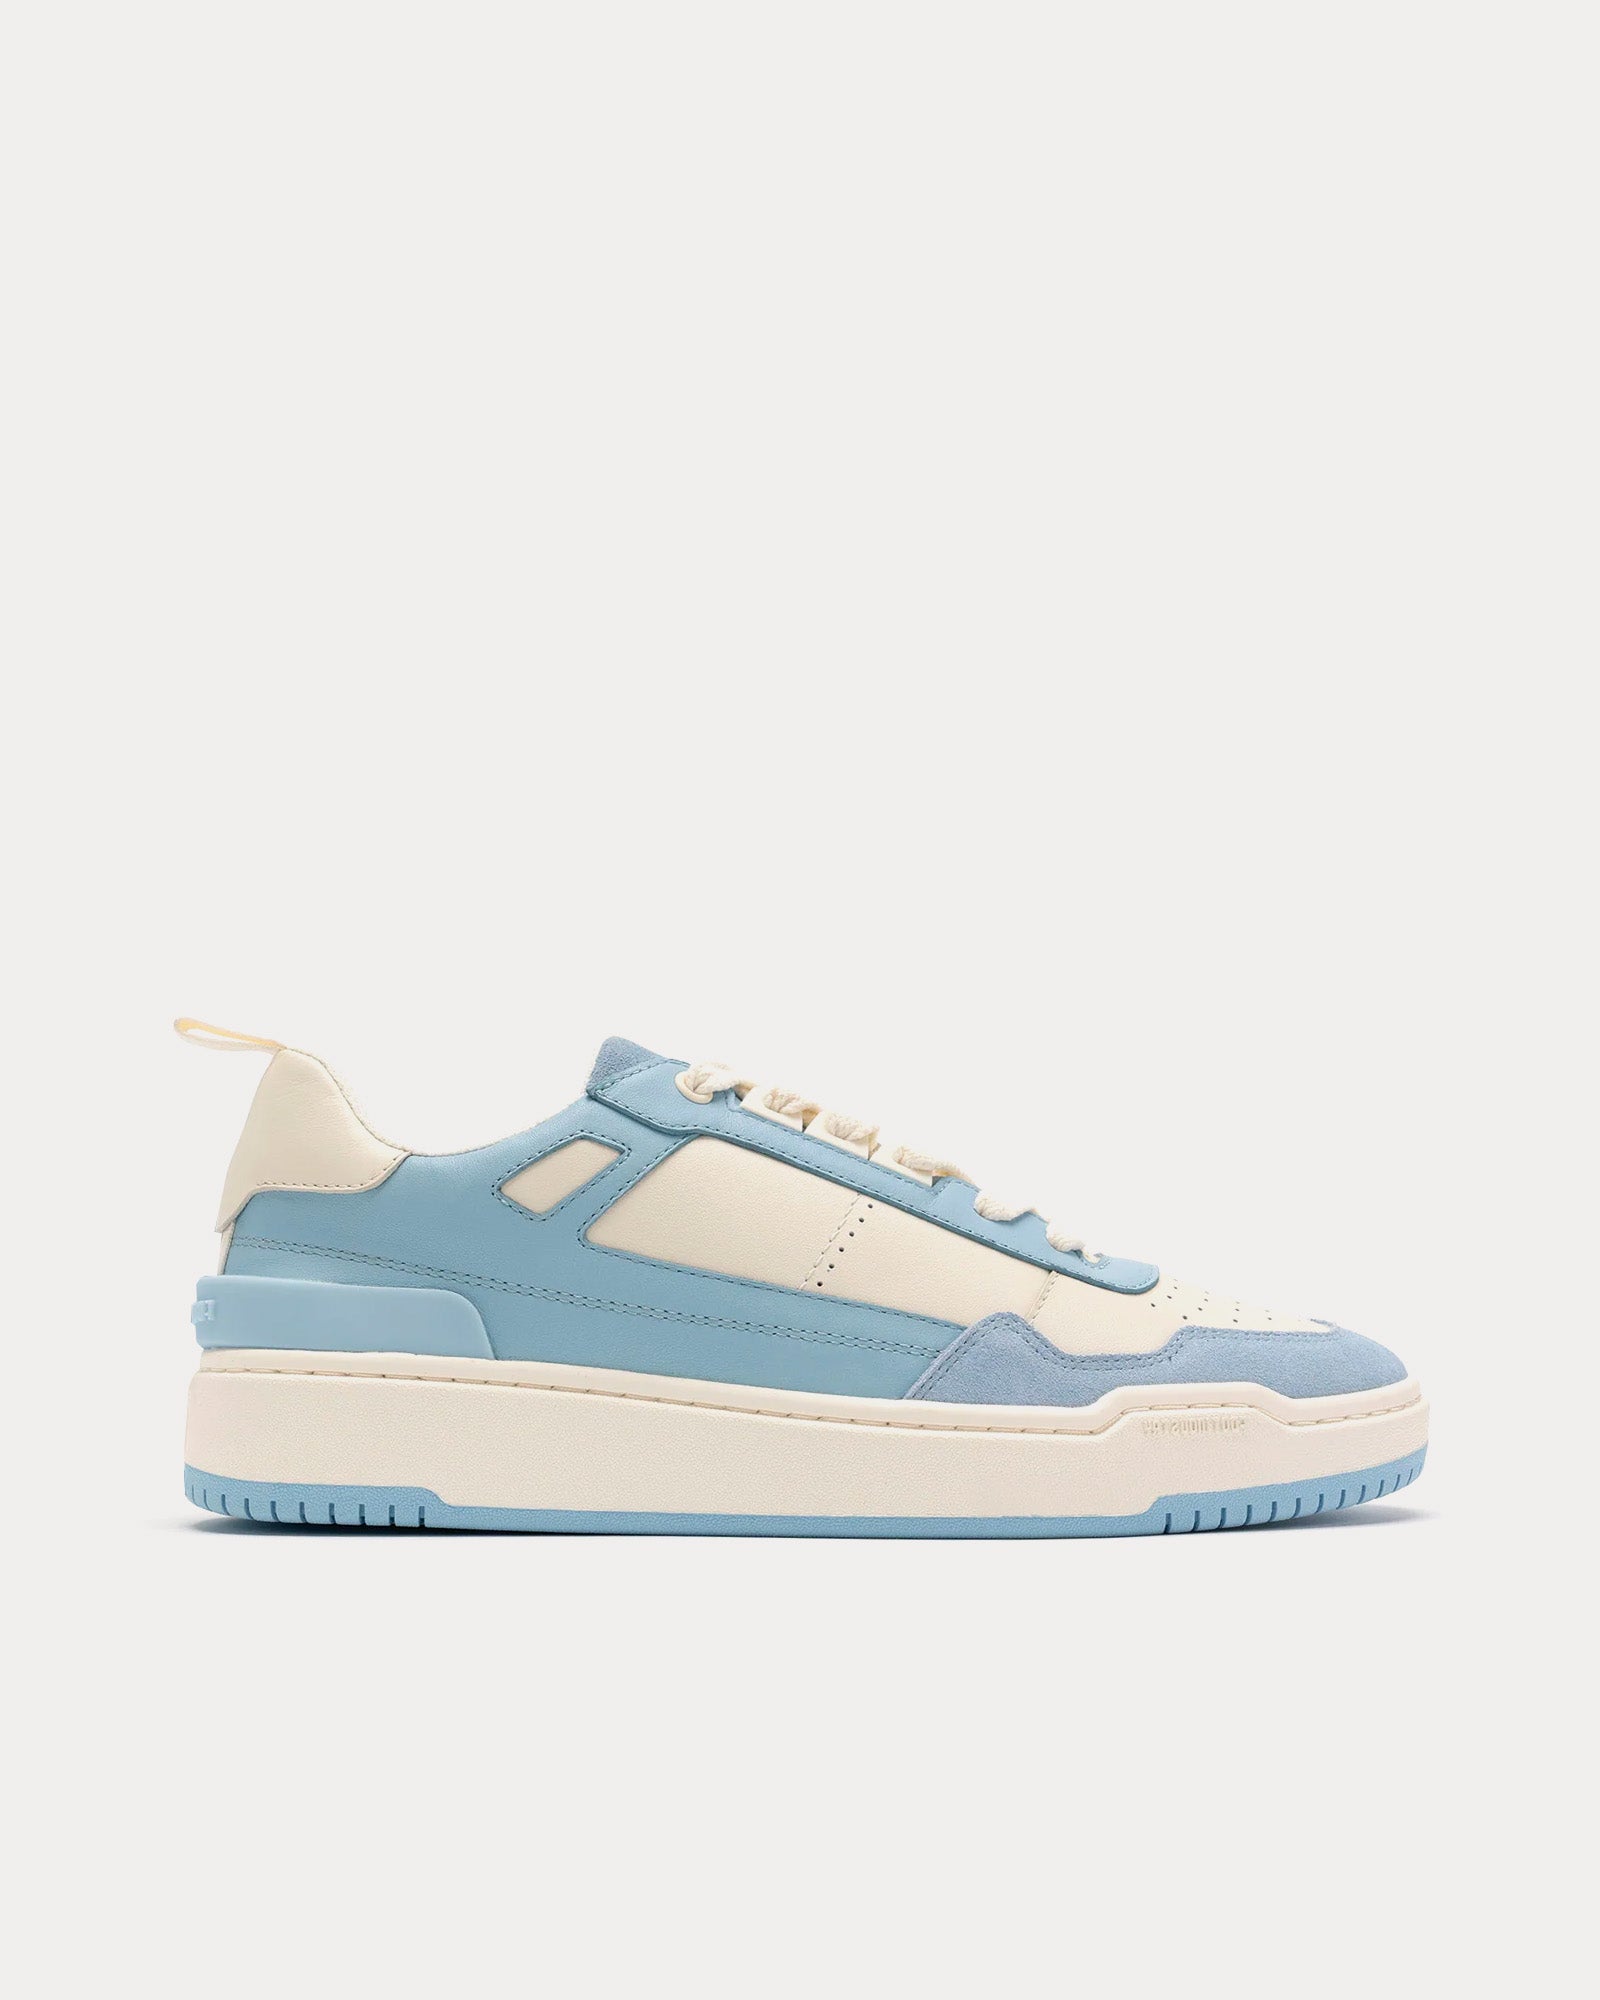 Foot Industry - 90's The Plateau Off-White / Light Blue Low Top Sneakers